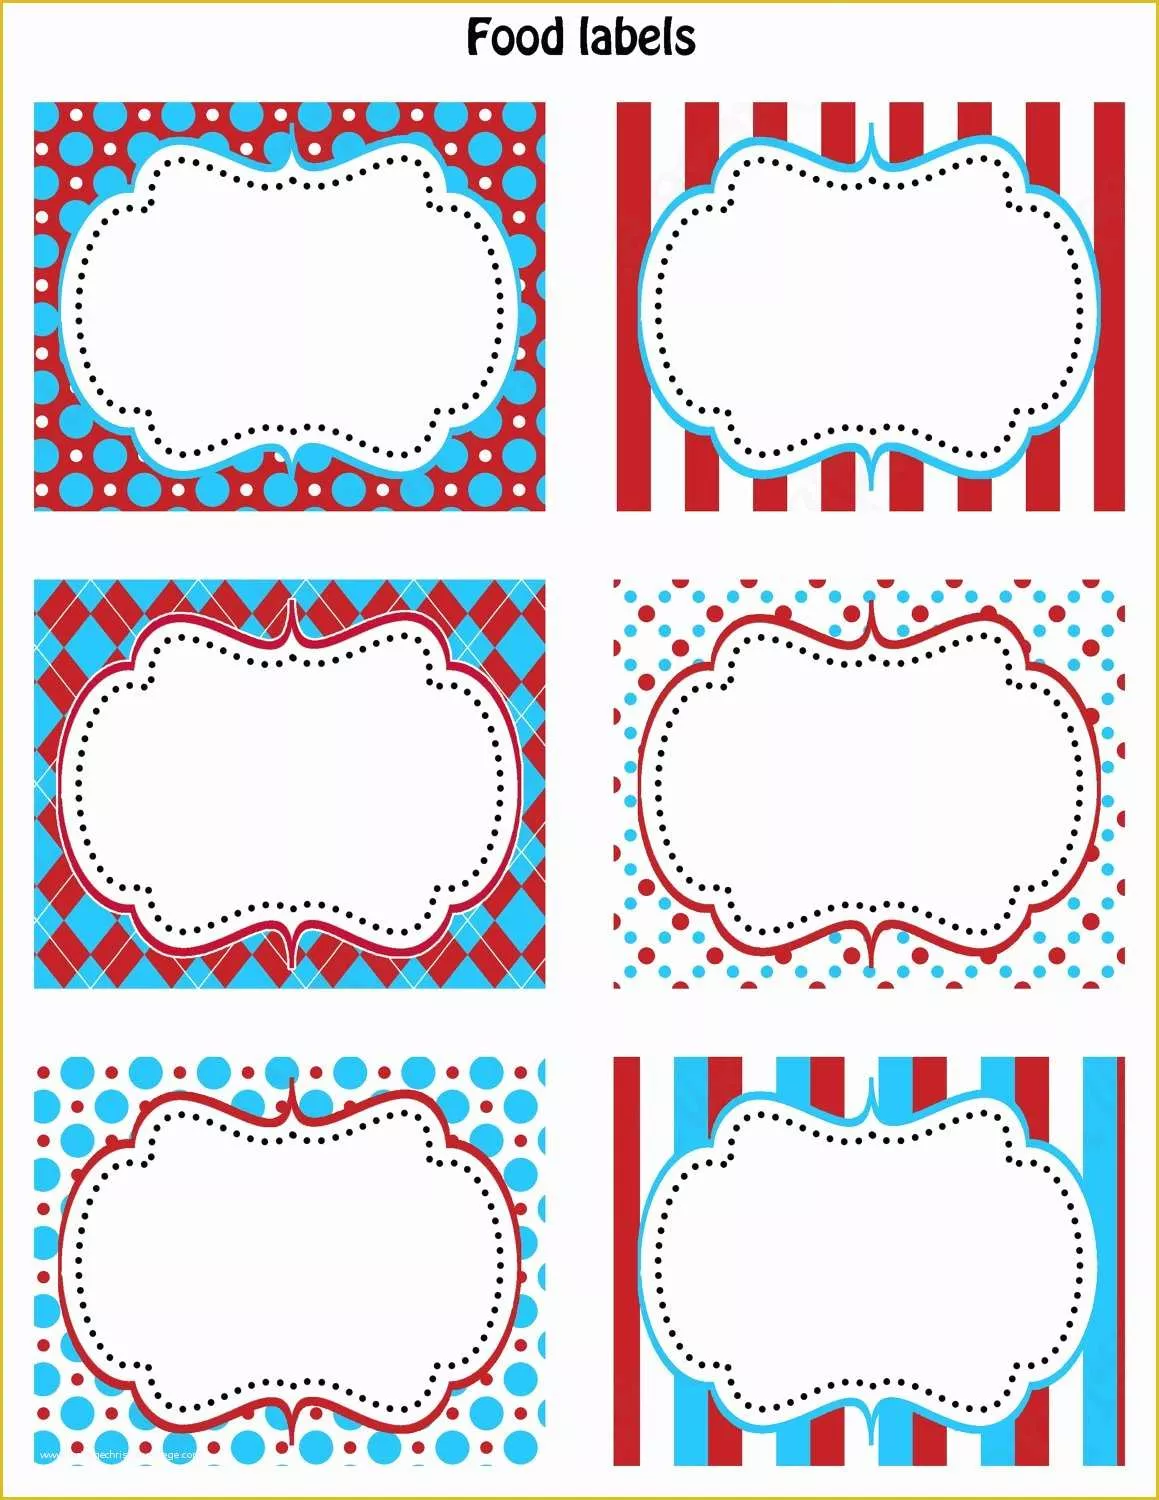 Free Printable Food Labels Templates Of Dr Seuss Inspired 1st Birthday Party Printable Food Labels